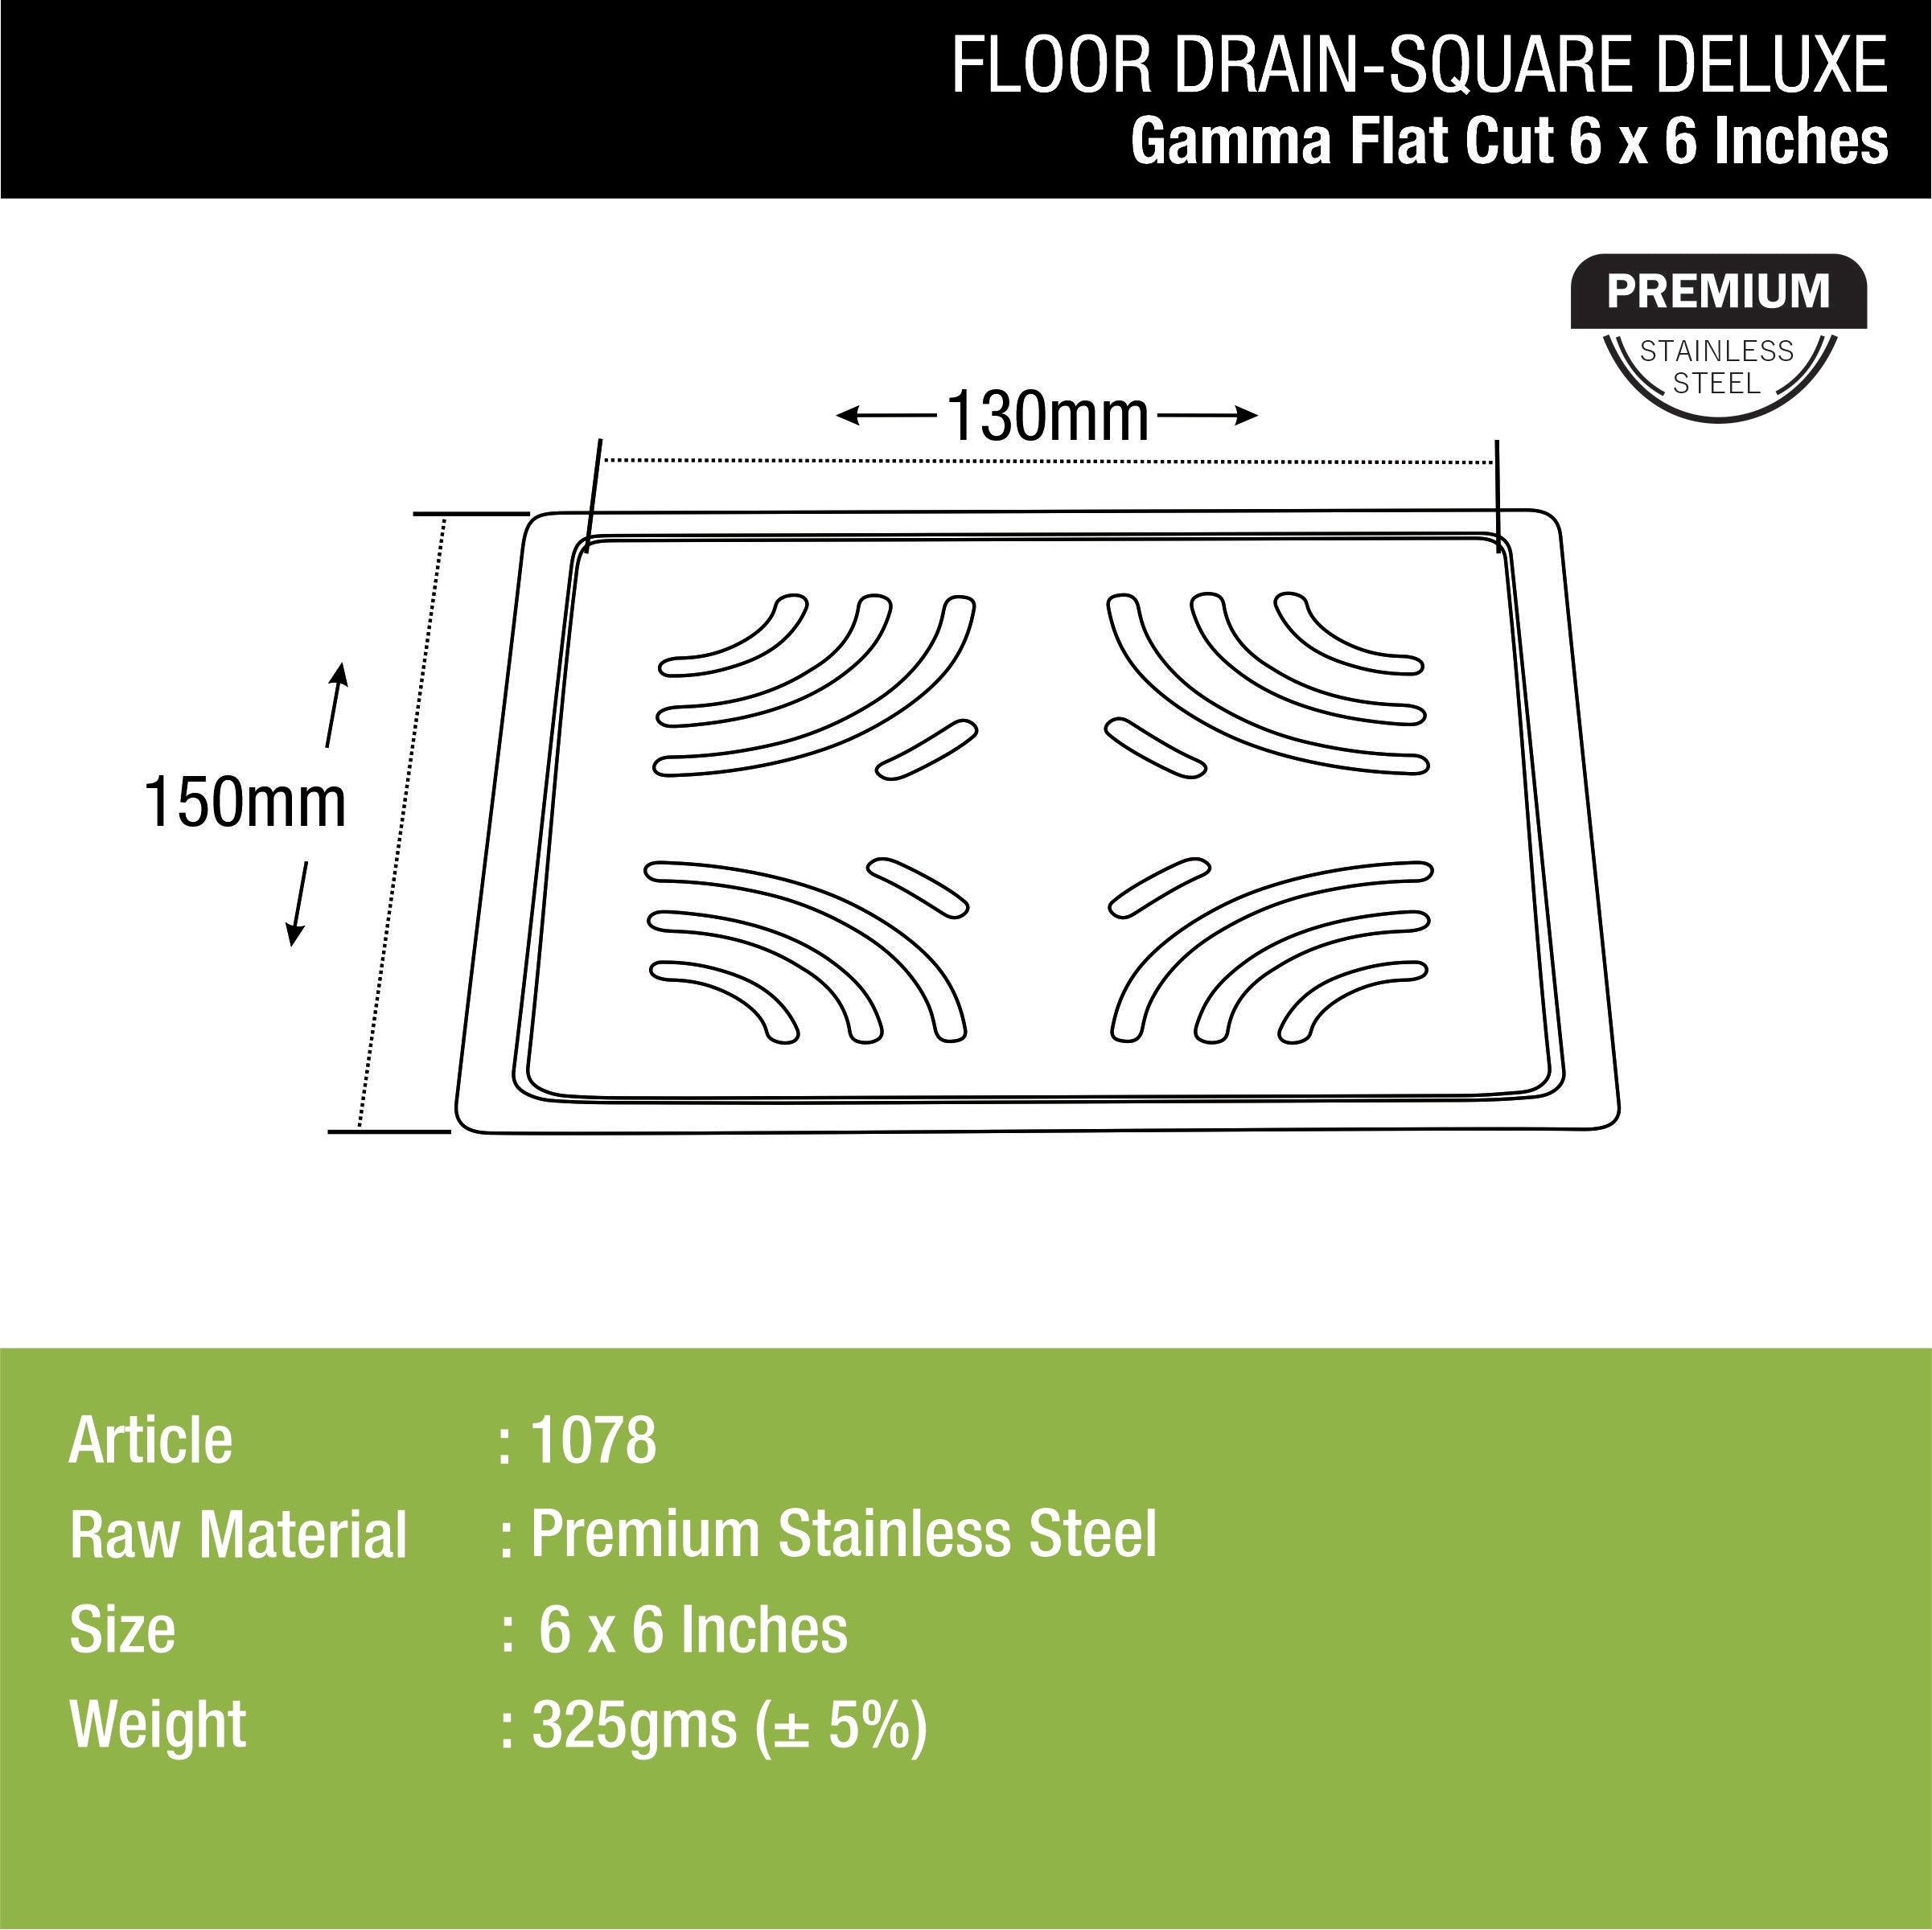 Gamma Deluxe Square Flat Cut Floor Drain (6 x 6 Inches) dimensions and sizes